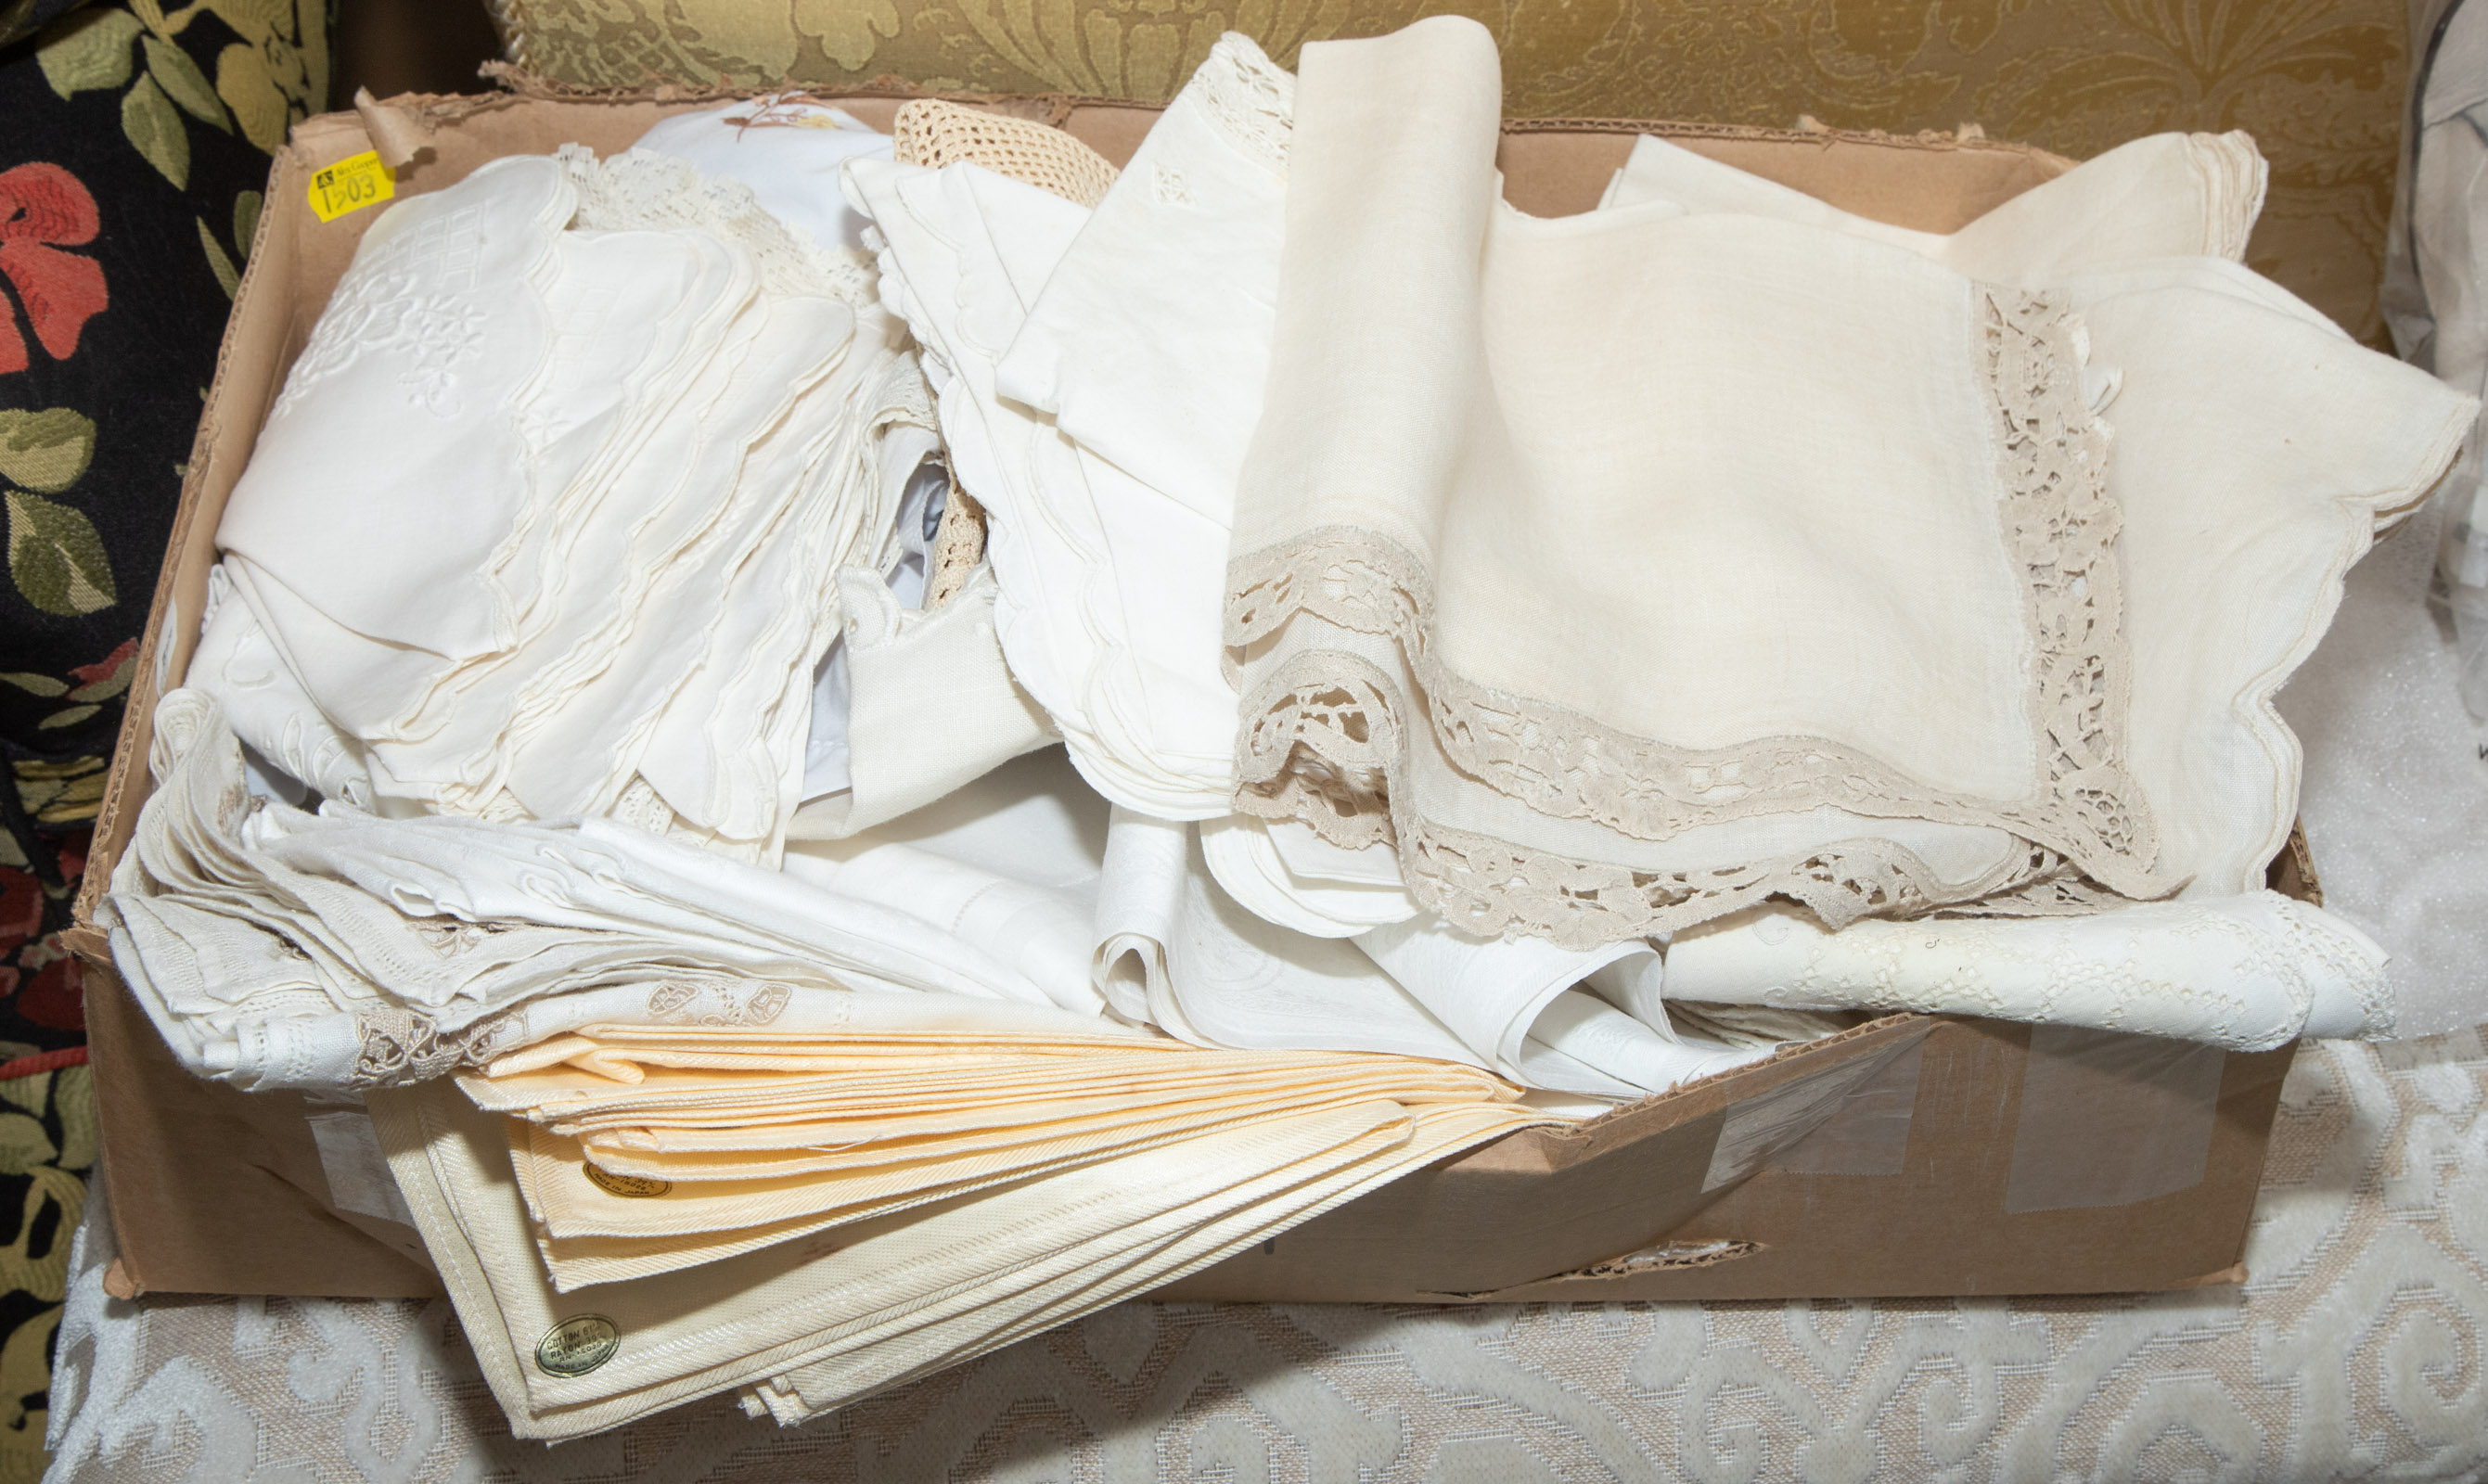 GROUP OF VINTAGE TABLE LINENS Including 337a4f